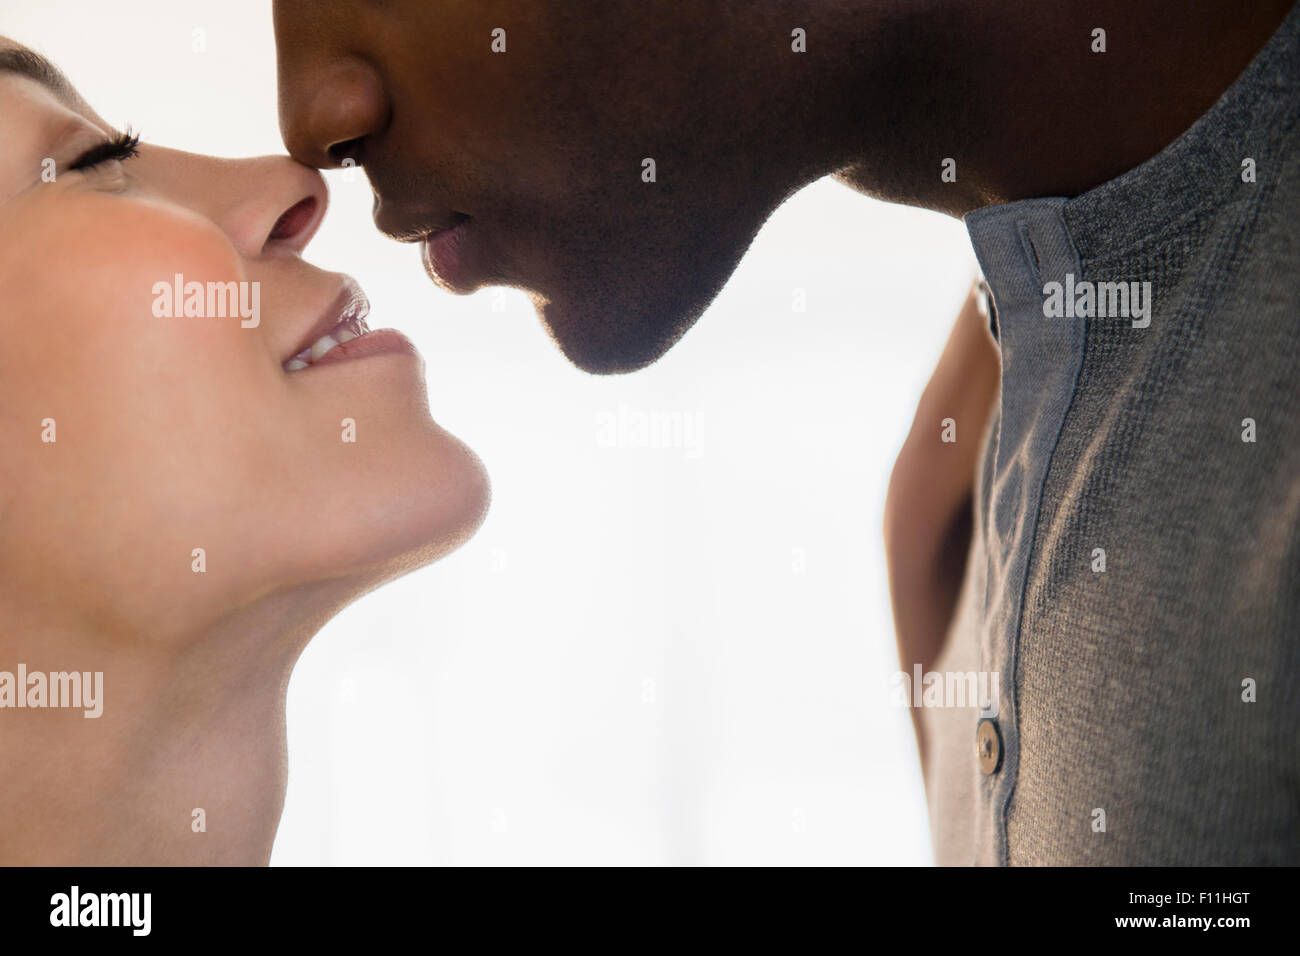 Close up of smiling couple kissing Banque D'Images